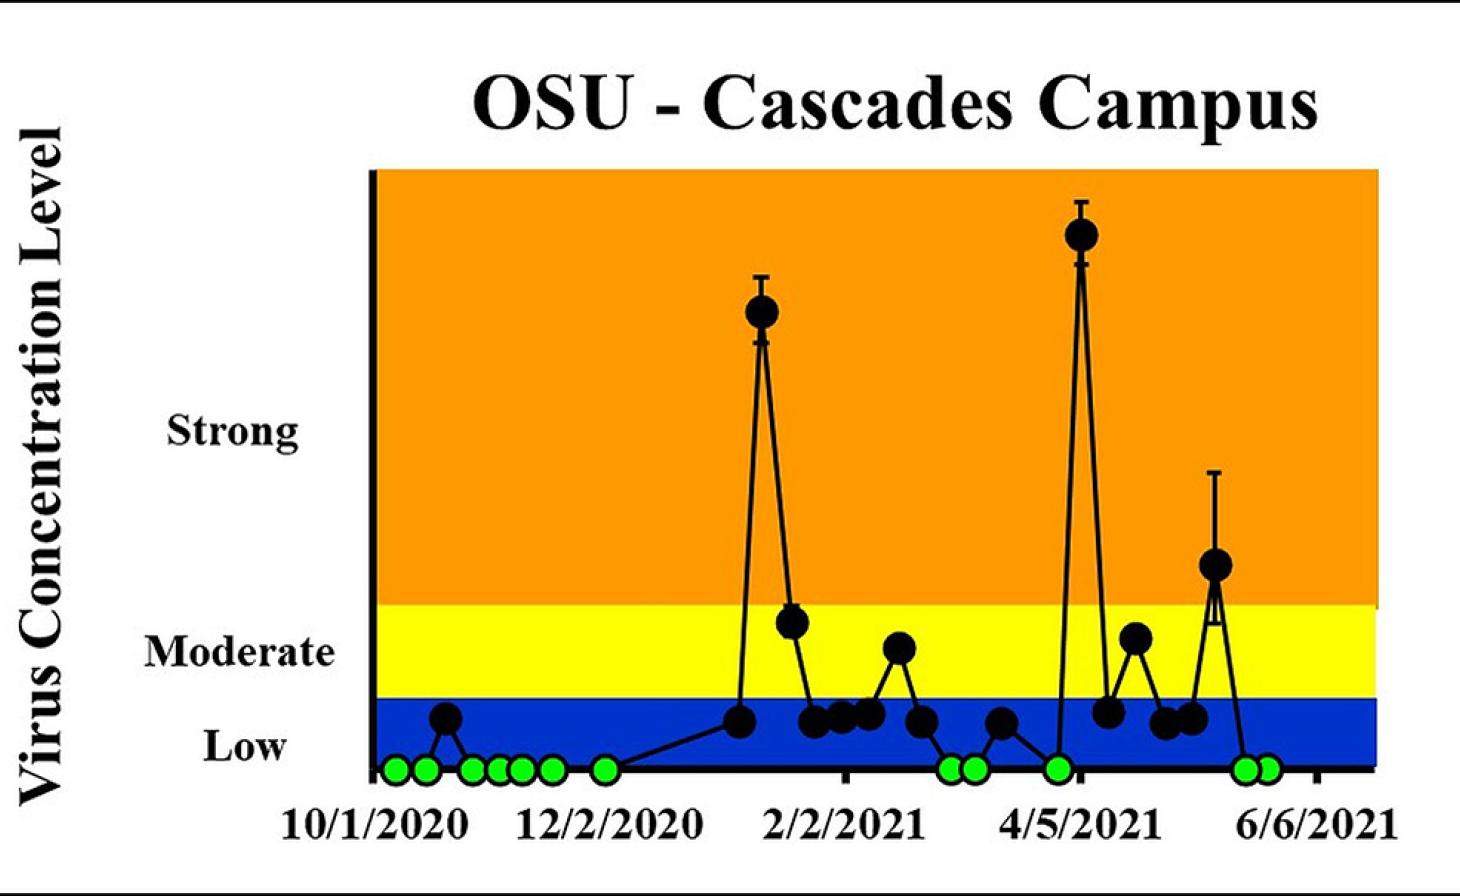 The concentration on the most recent sampling dates (5/18/2021 and 5/24/2021) indicated a viral load below the detection limit at OSU-Cascades Campus